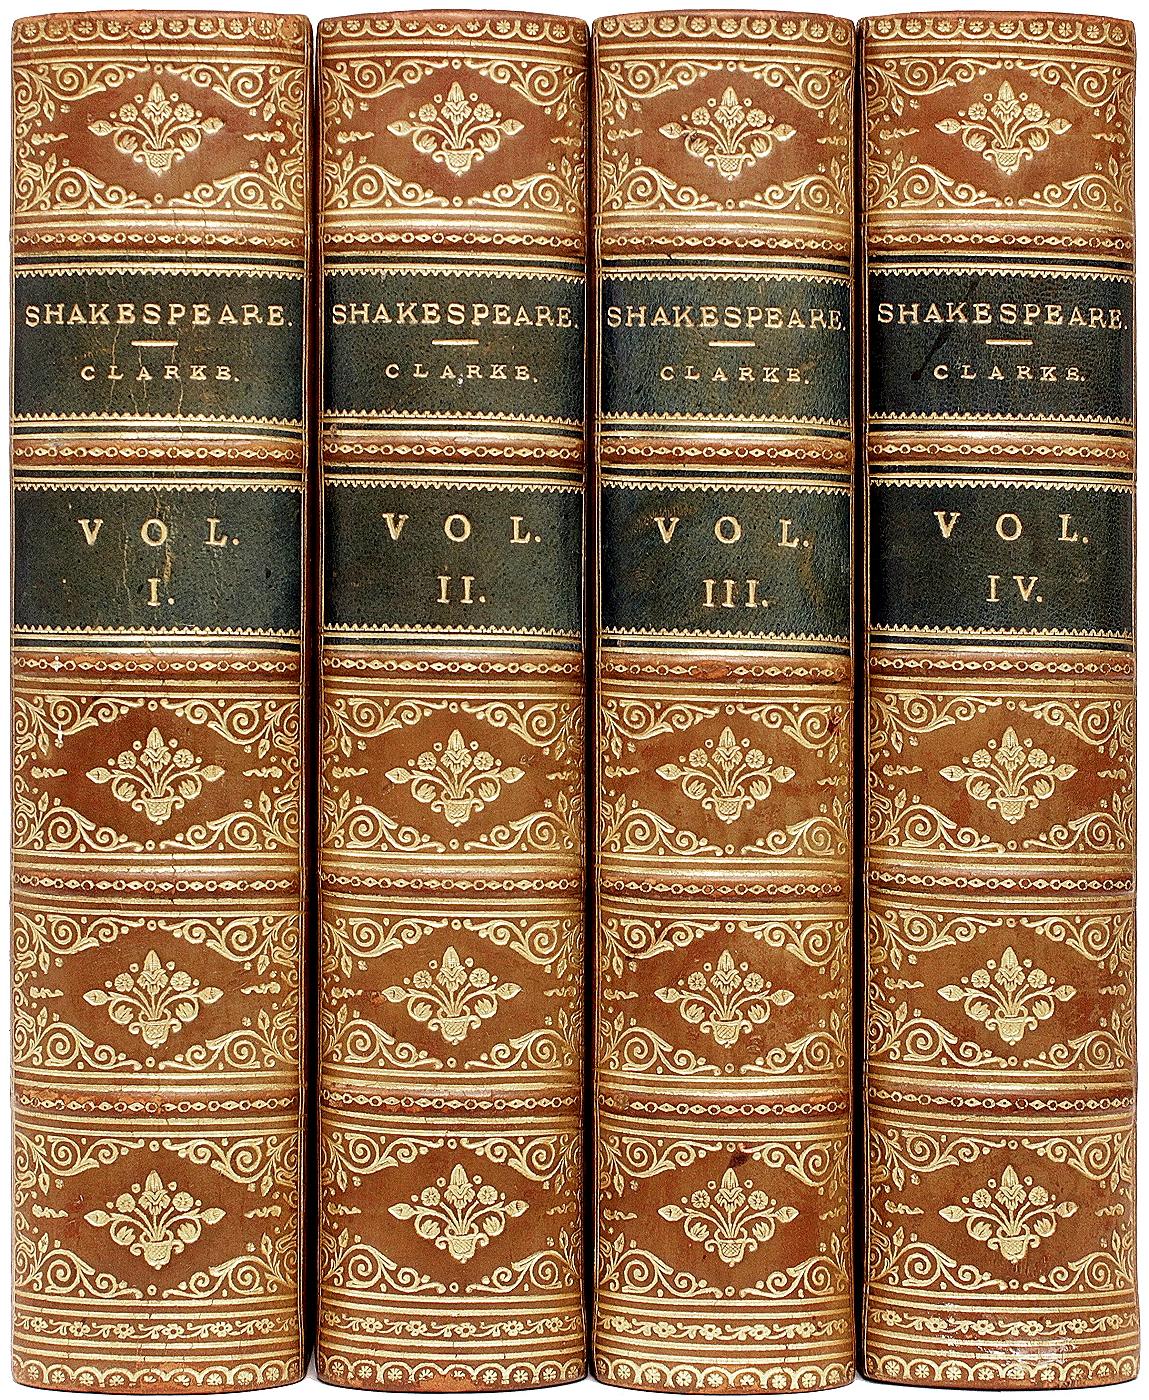 AUTHOR: SHAKESPEARE, William. 

TITLE: The Works Of William Shakespeare.

PUBLISHER: London: Bickers & Son, 1881.

DESCRIPTION: 4 vols., 8-15/16